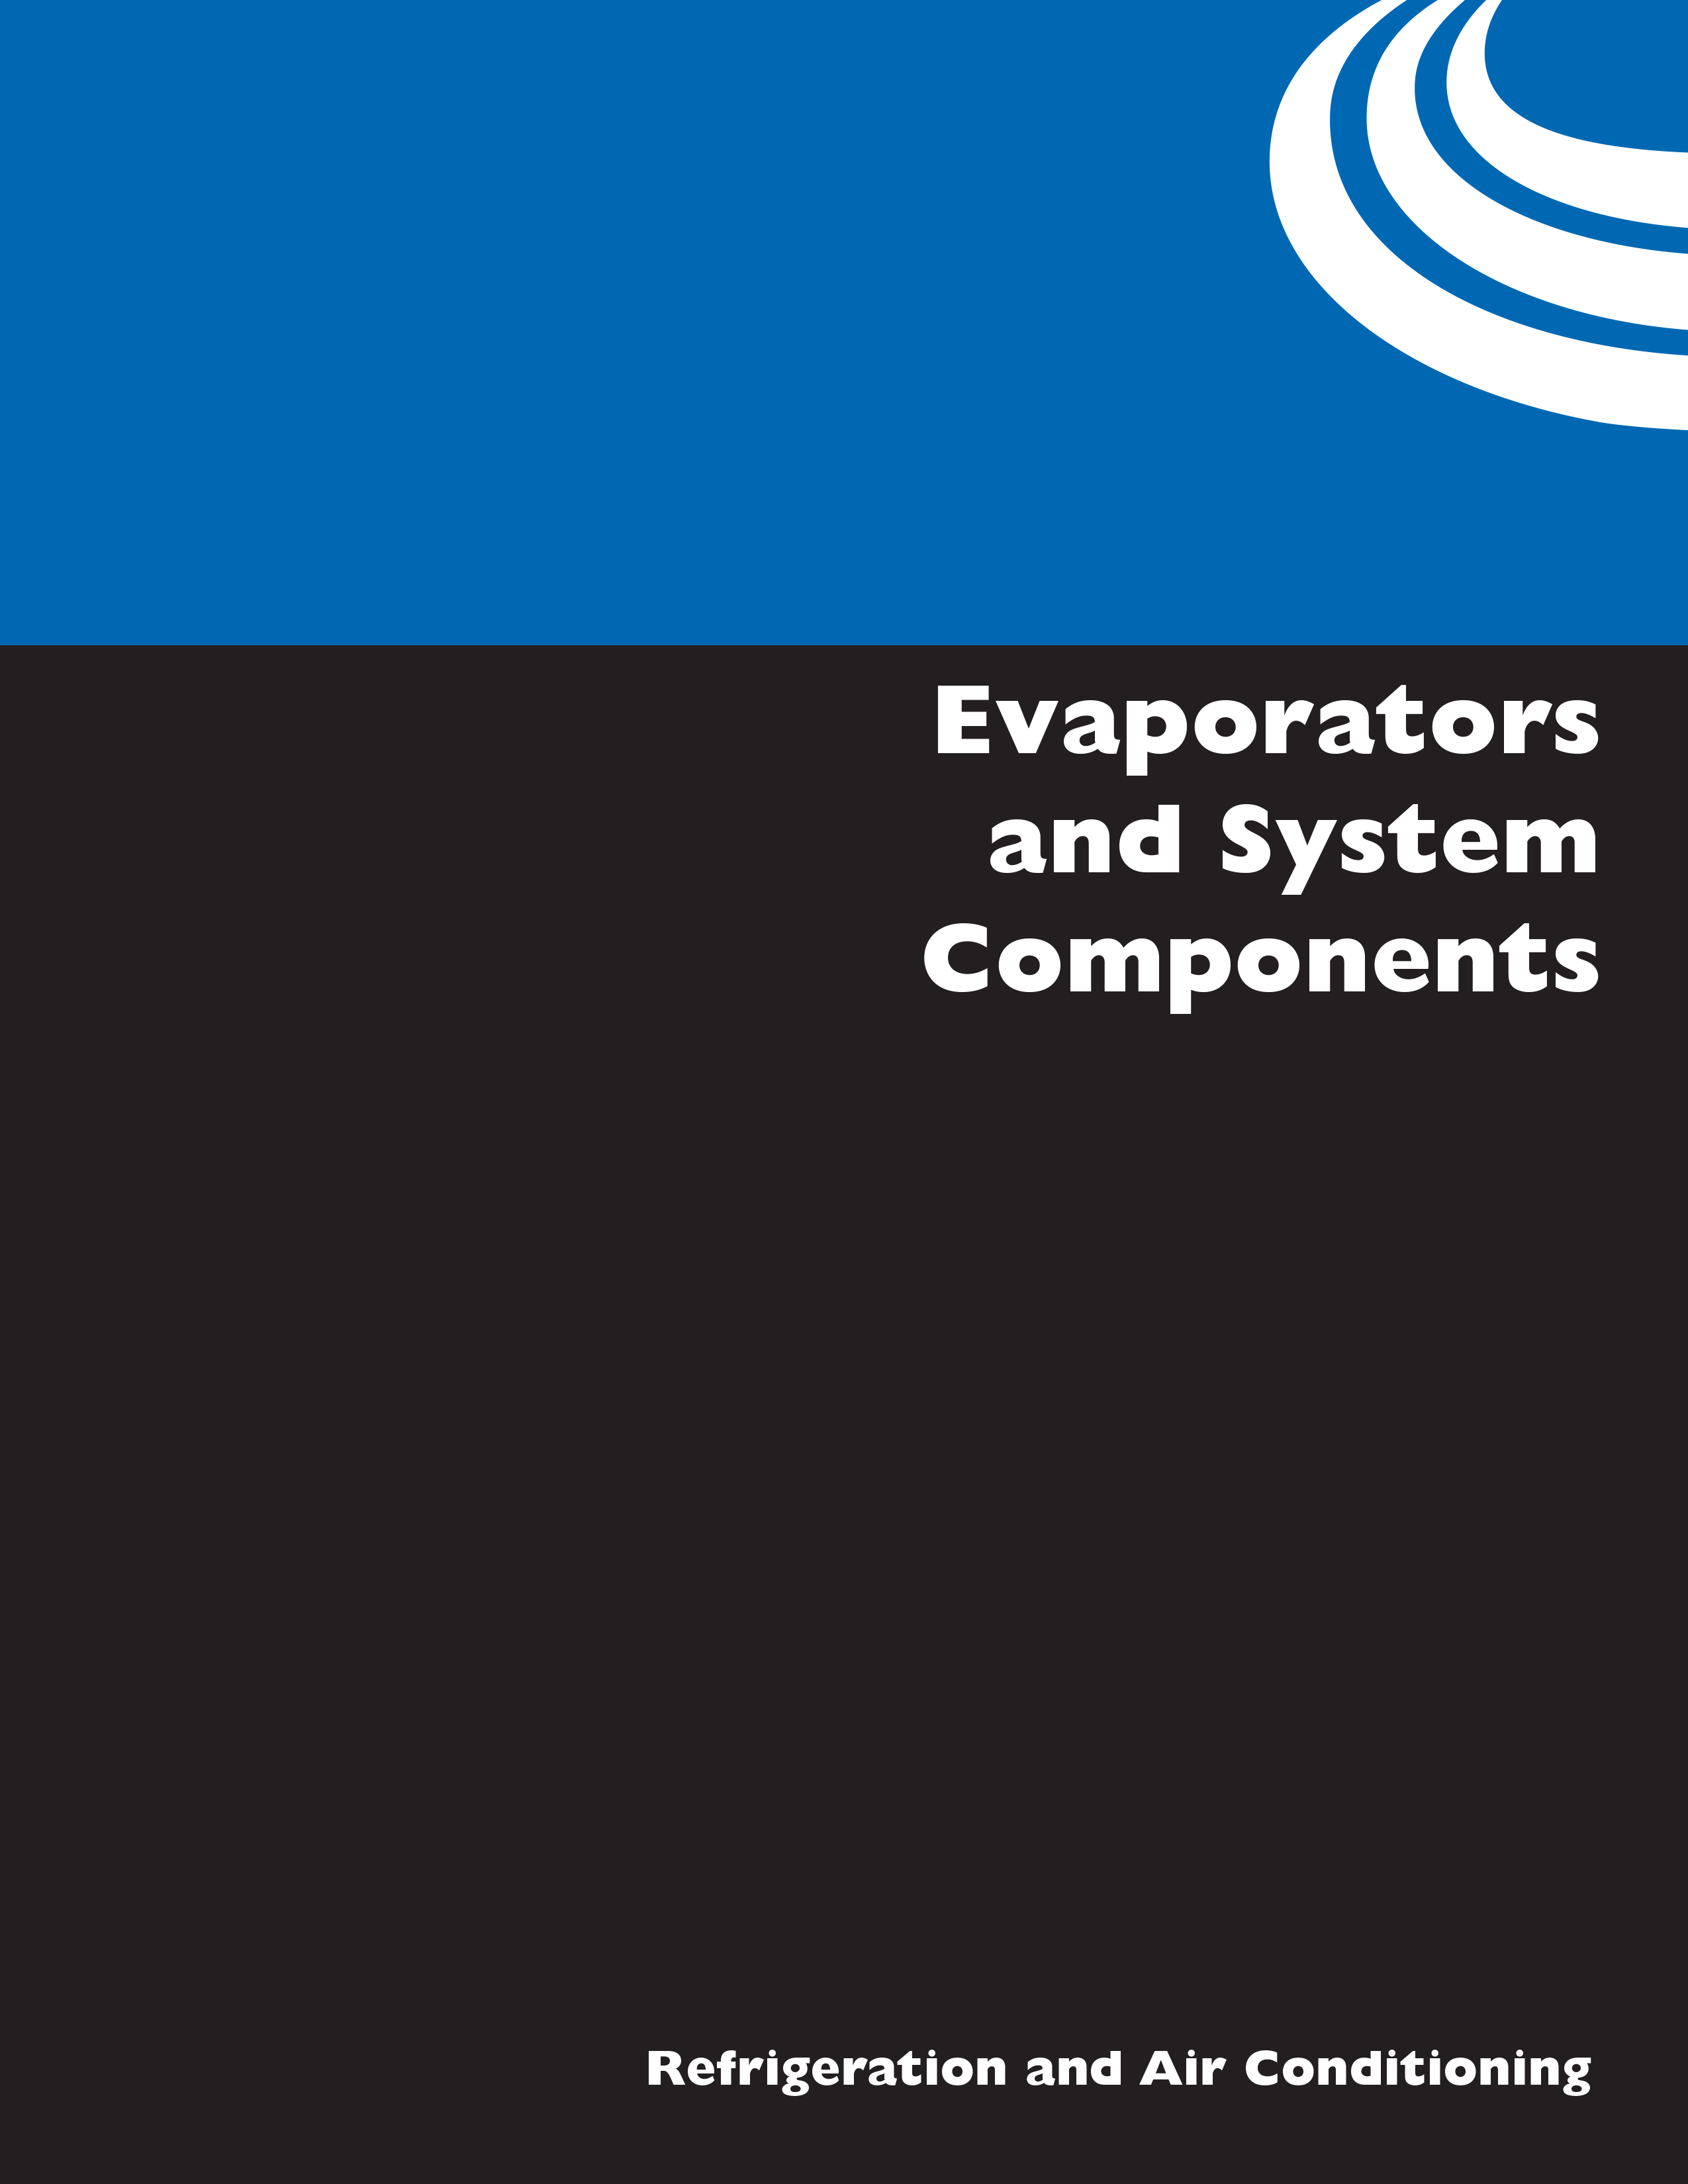 Evaporators and System Components